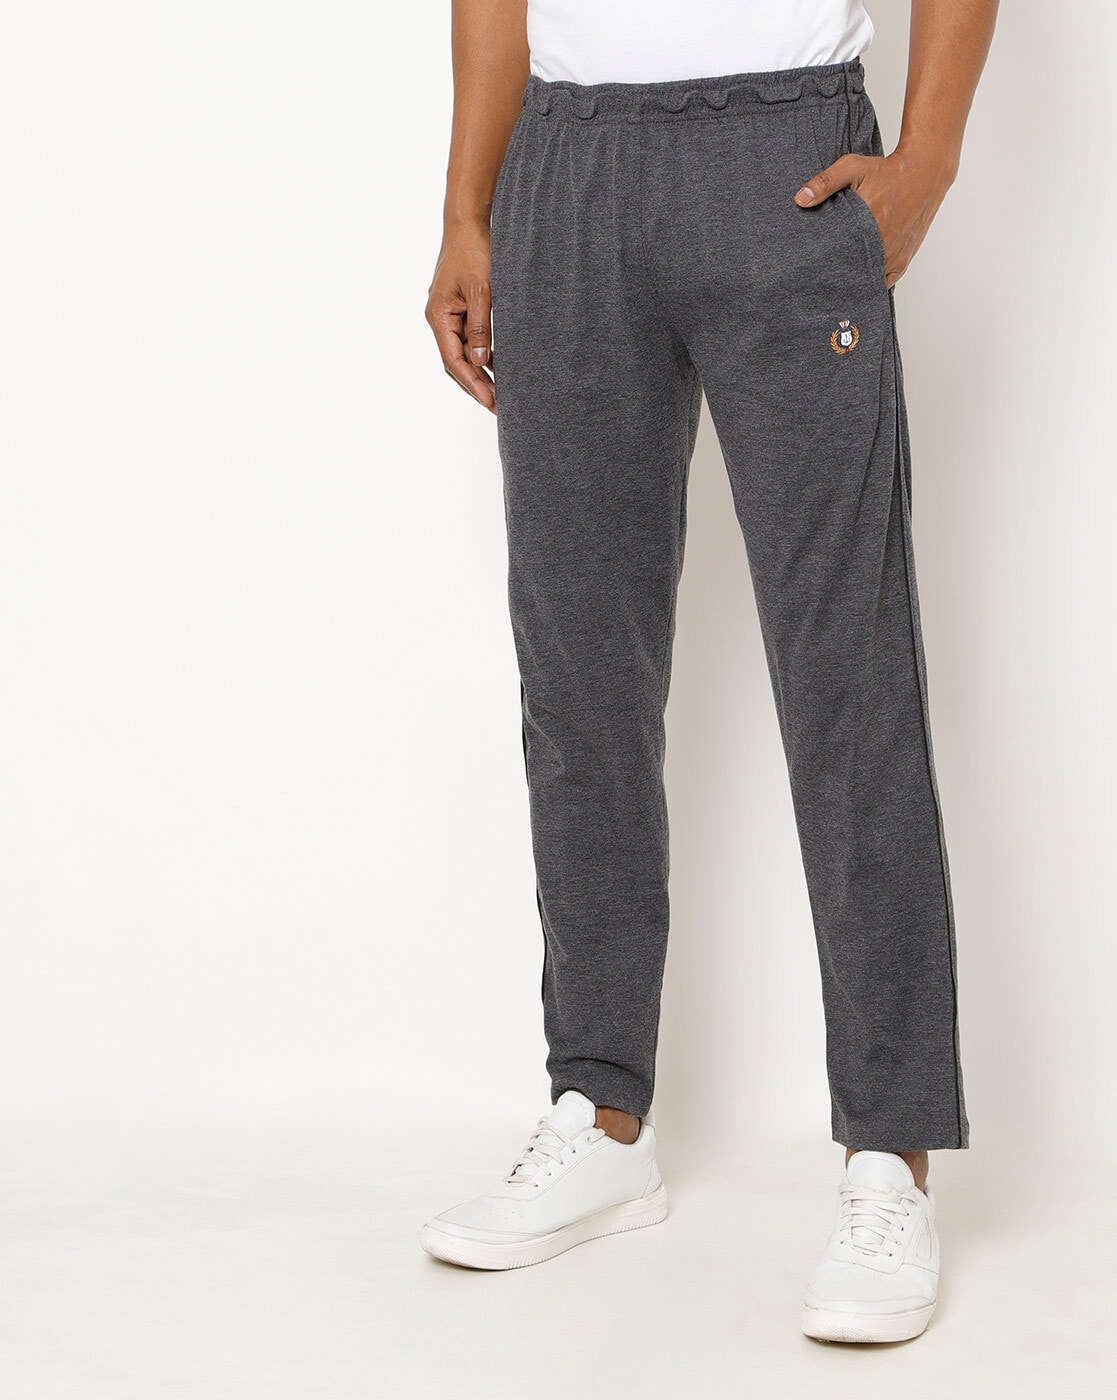 Buy Olive Track Pants for Men by MAX Online | Ajio.com